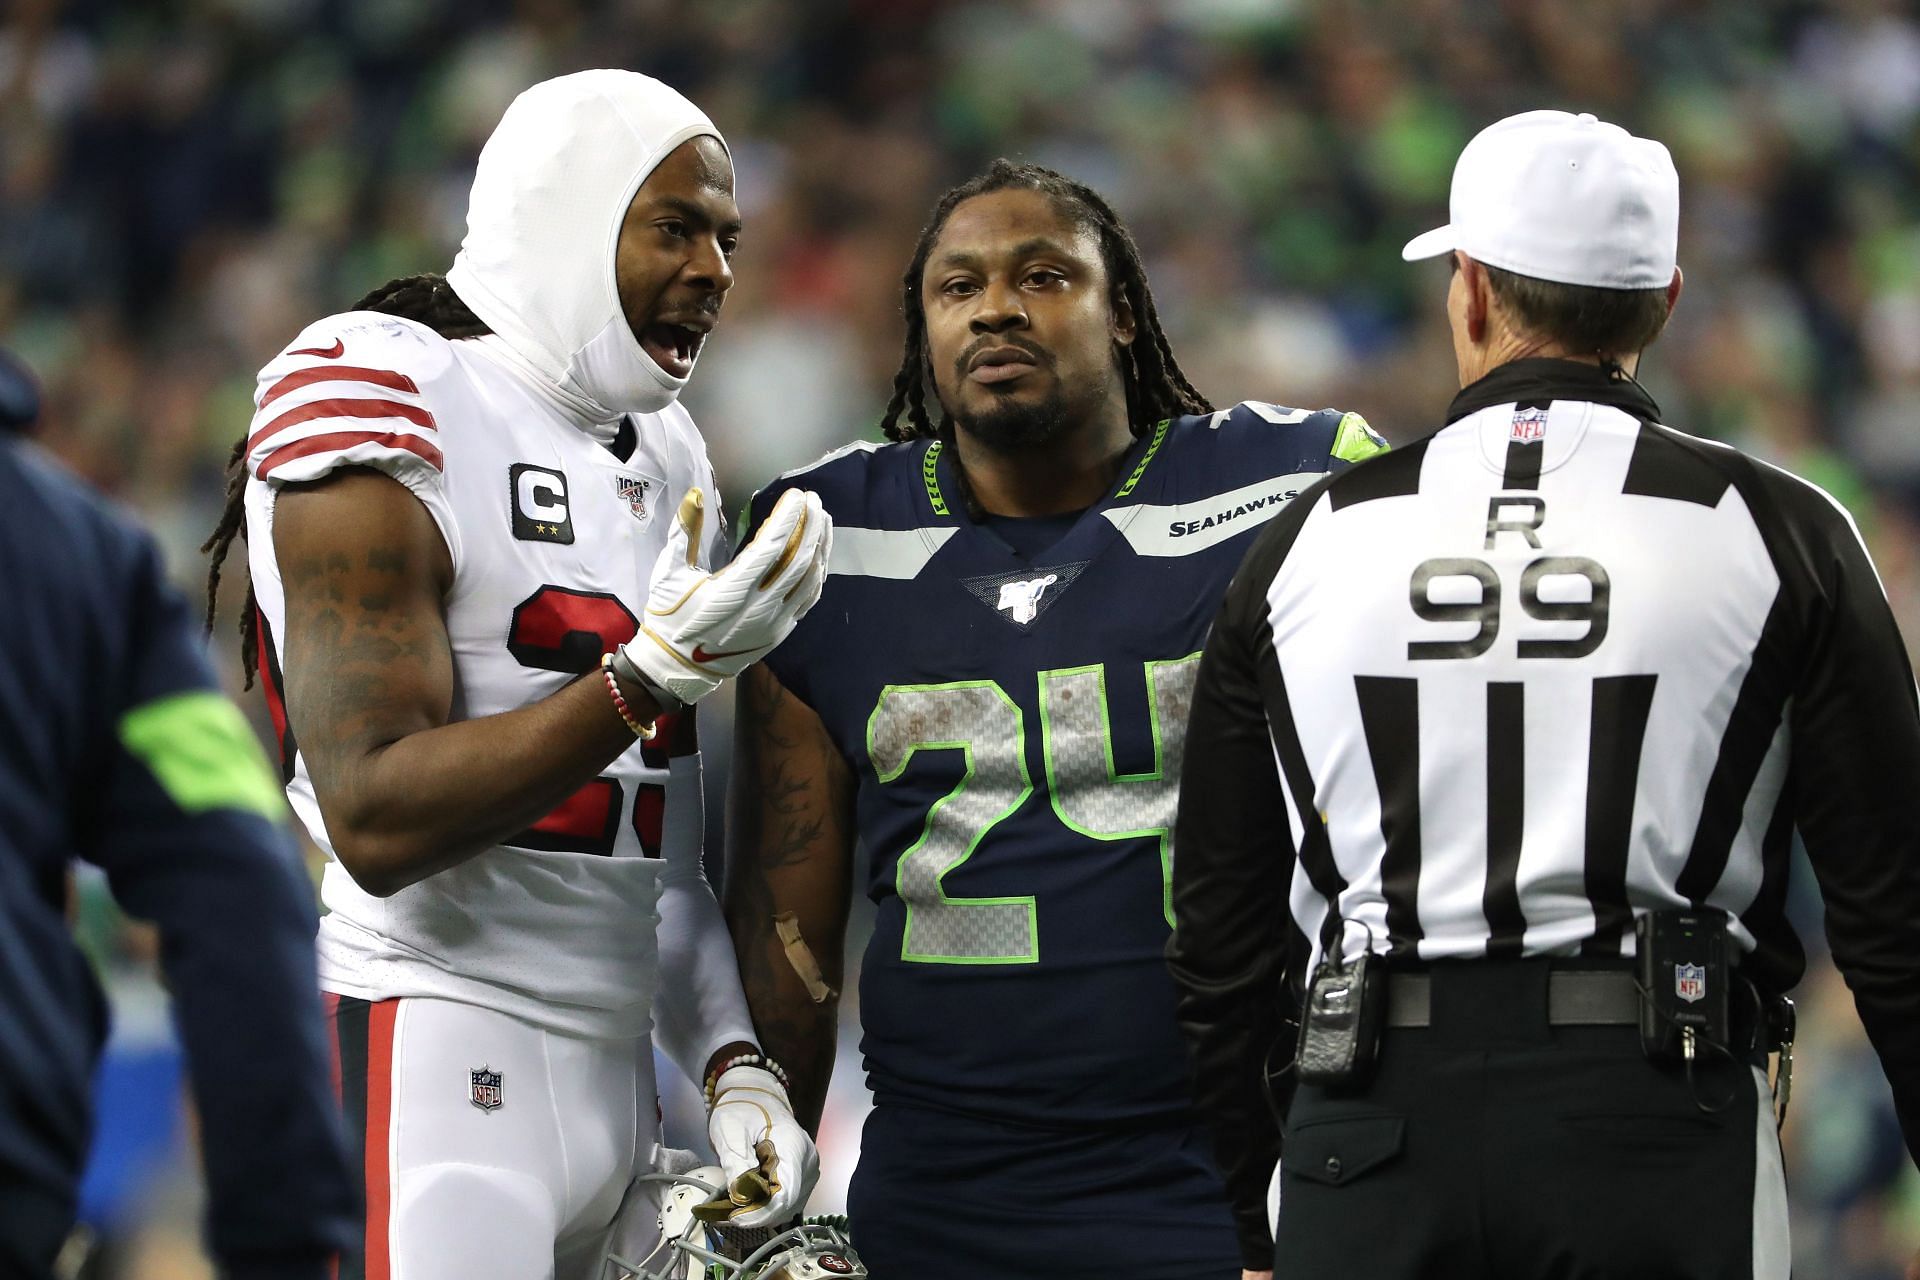 Everyone is talking about Marshawn Lynch, but Sunday night's Seahawks-49ers  game really is about Russell Wilson